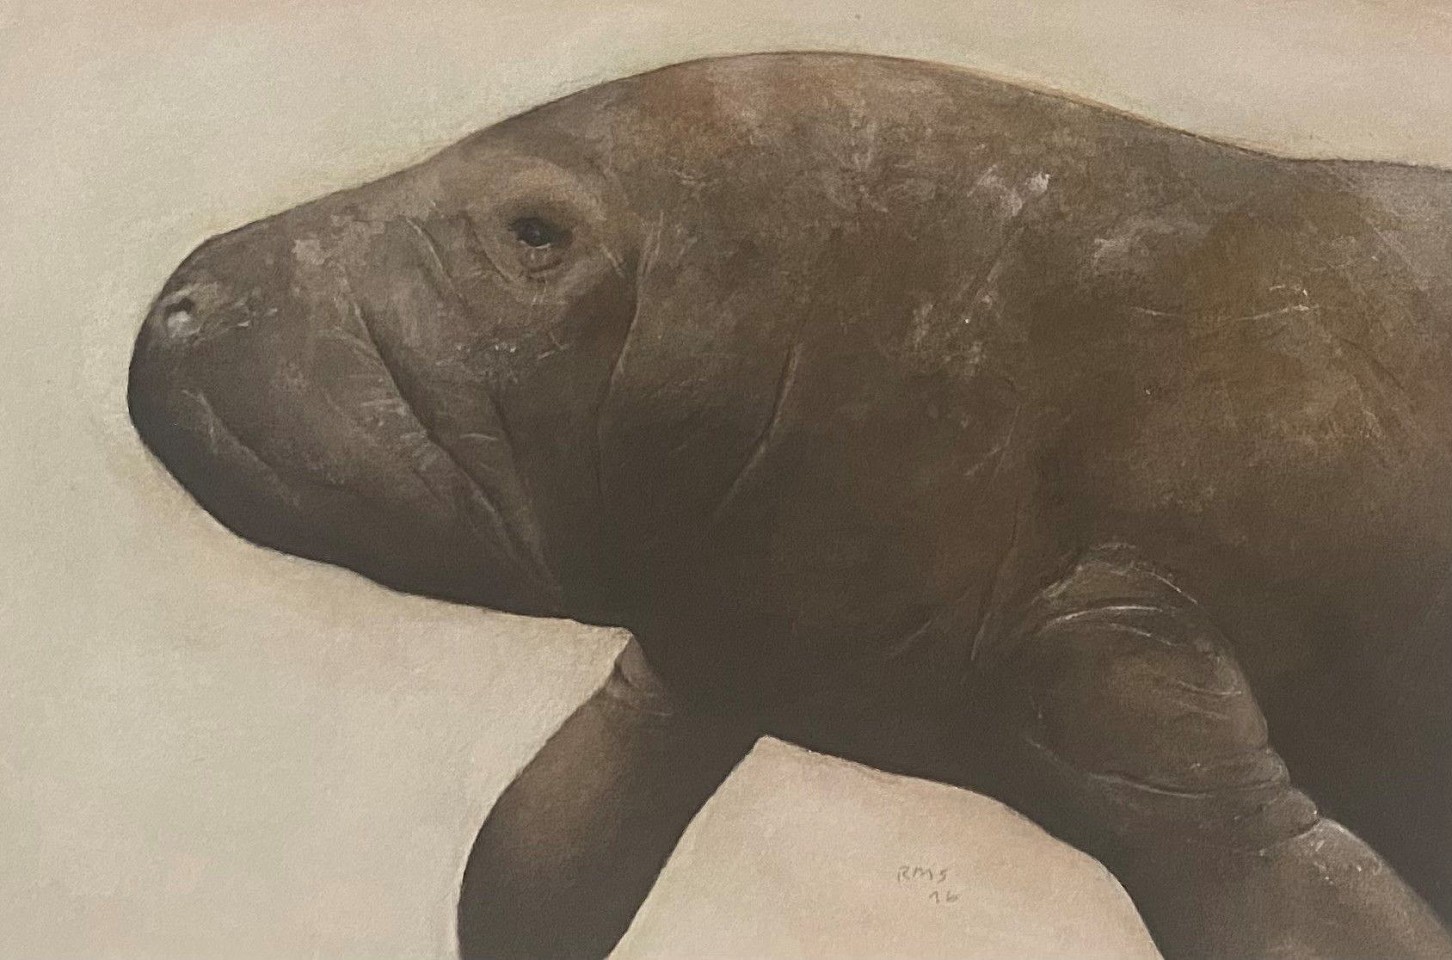 Rafael Soares, Manatee
watercolor and gouache on paper, 6"" x 9""
LD1122.05
$2,500